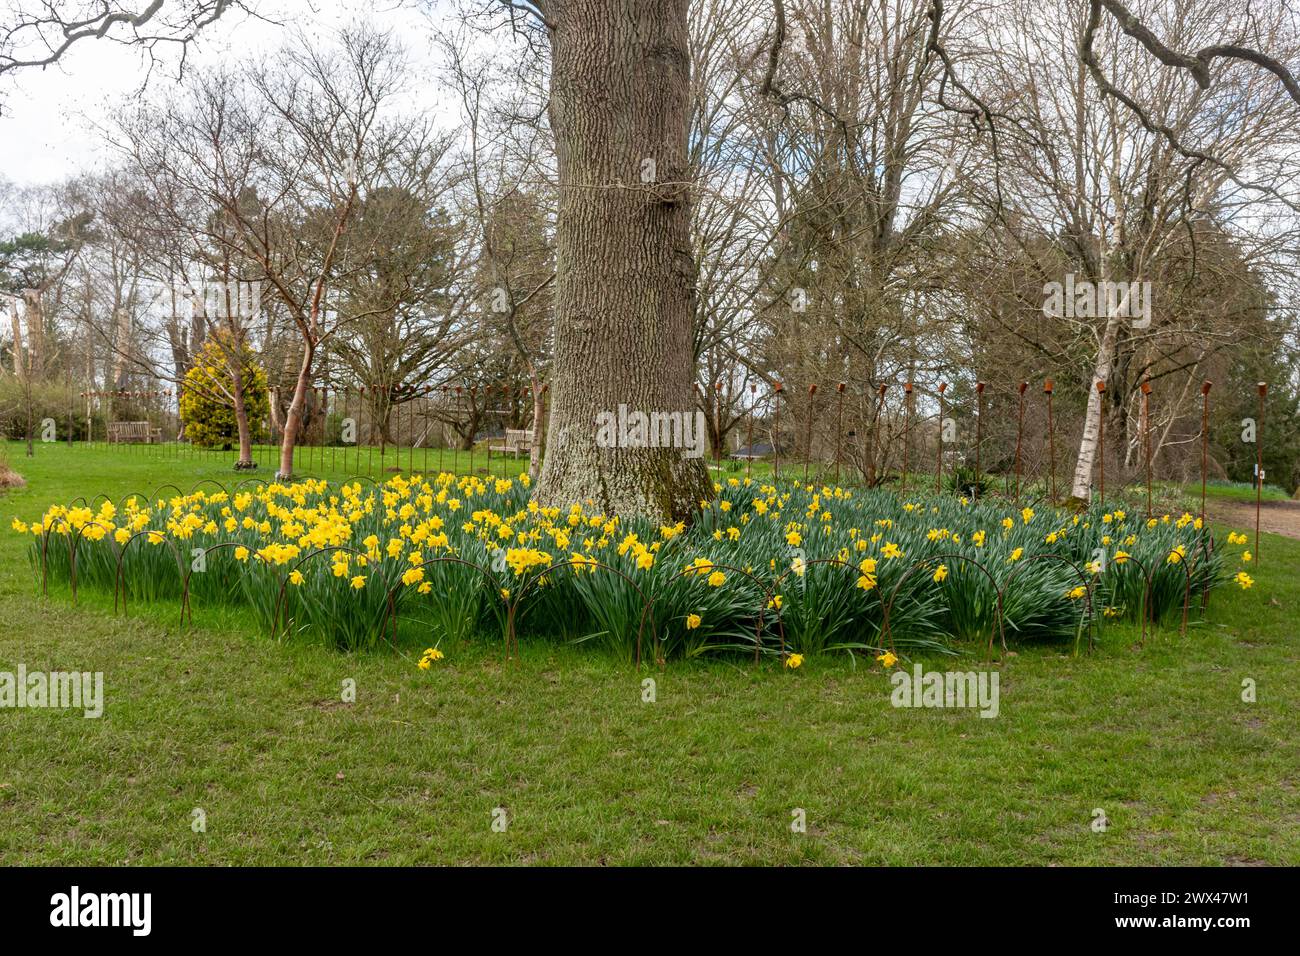 Daffodils planted in a circle around a tree, spring flowers in a garden, UK Stock Photo